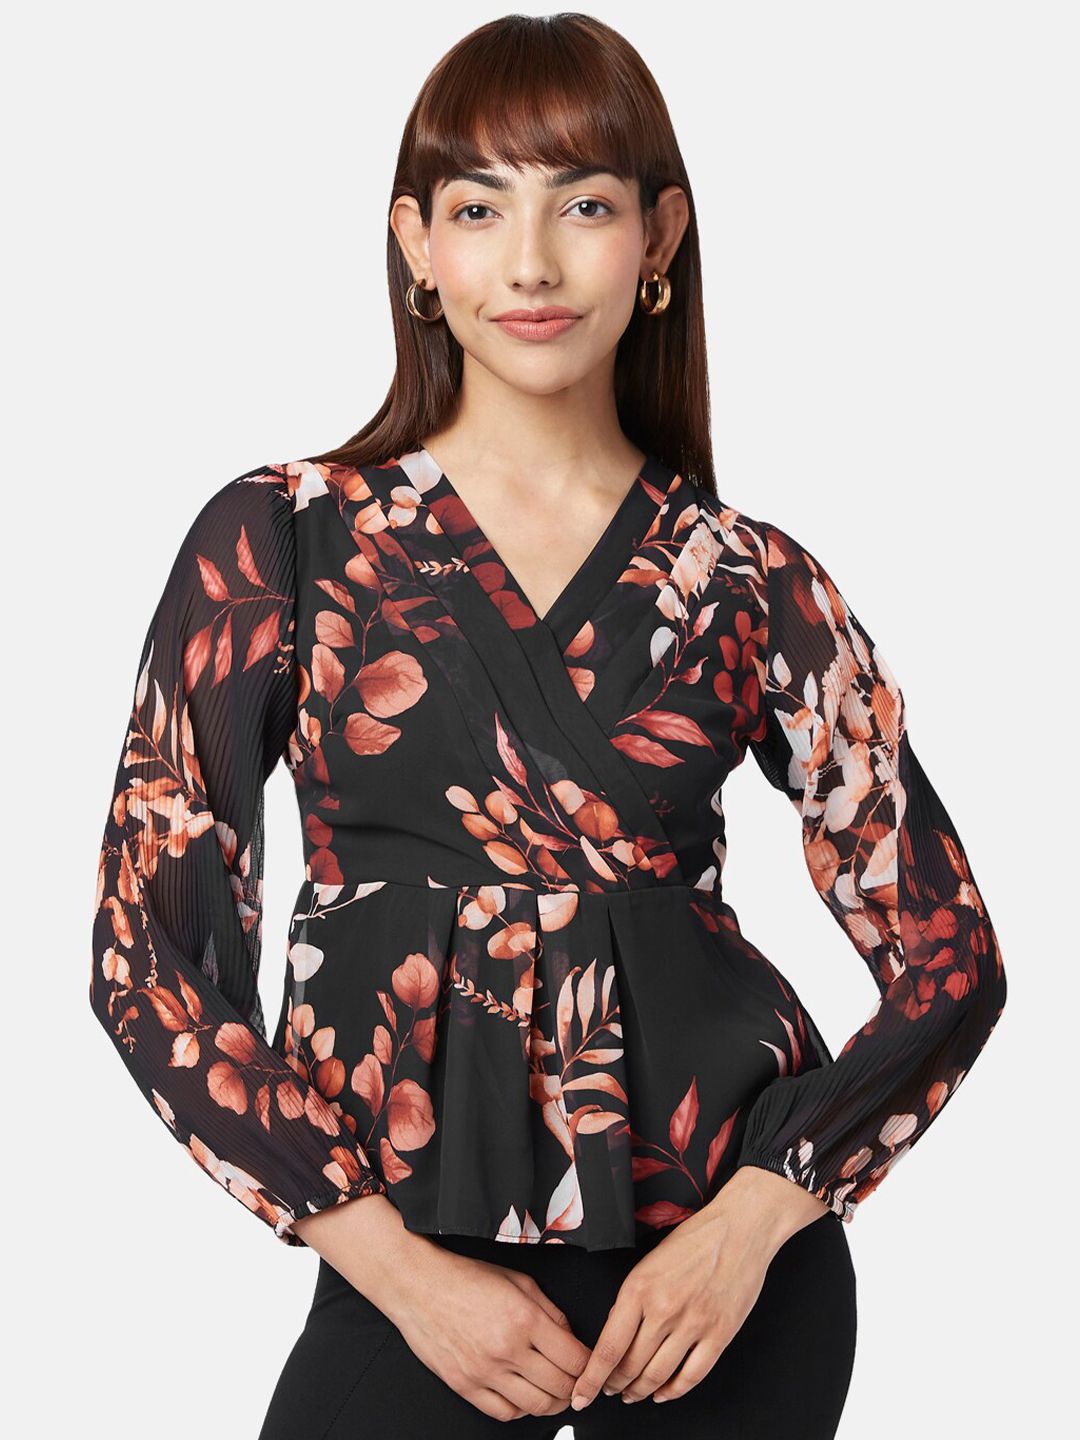 Annabelle by Pantaloons Black & Brown Floral Print Wrap Top Price in India